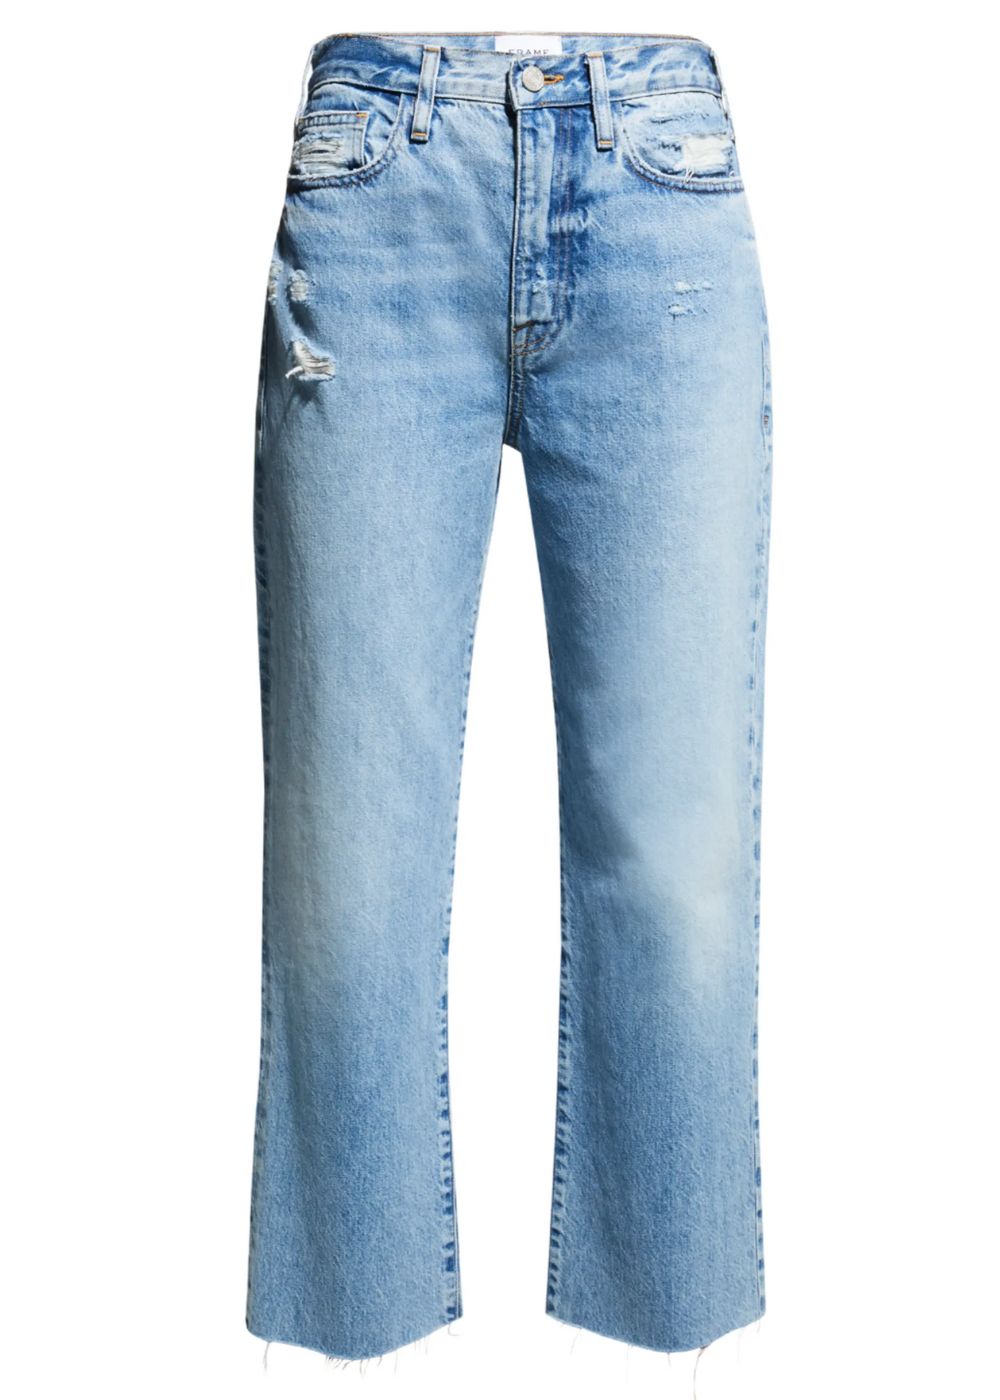 DENIM REFRESH: 7 PAIRS TO ADD TO YOUR CLOSET FOR FALL - Bradley Agather